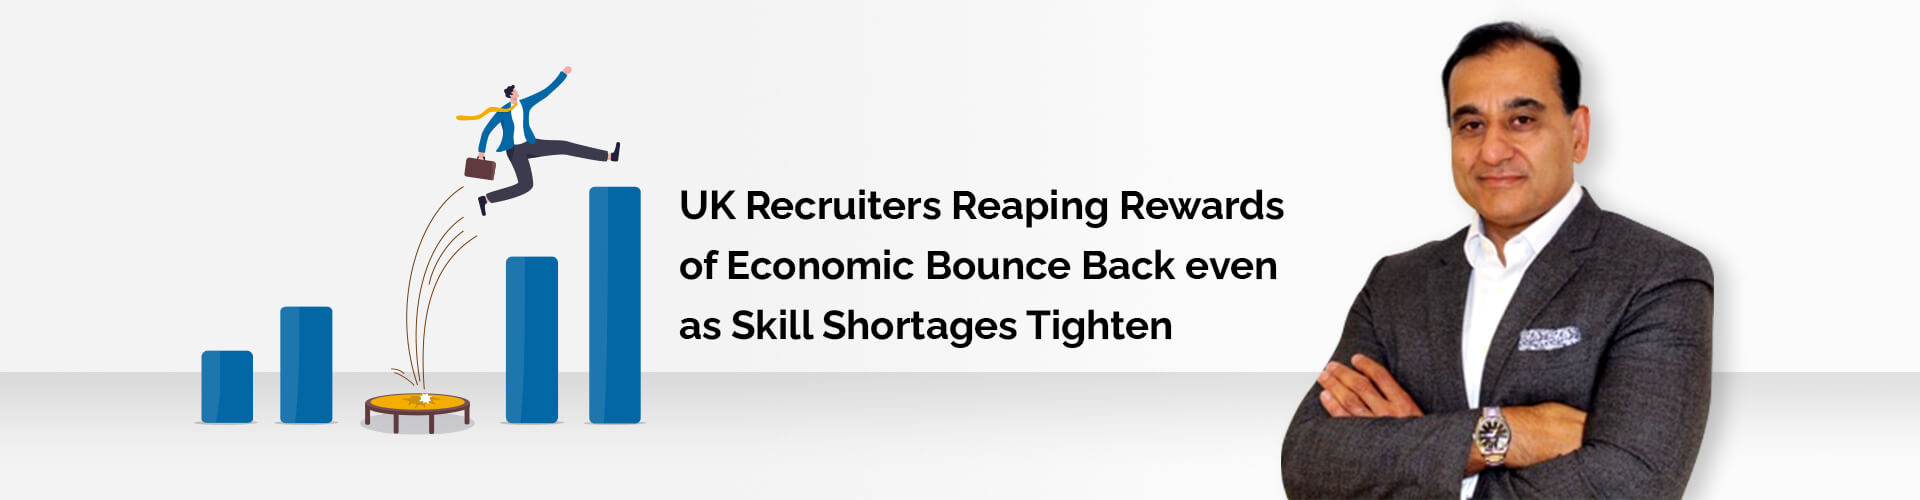 Uk Recruiters Reaping Rewards Of Economic Bounce Back Even As Skill Shortages Tighten